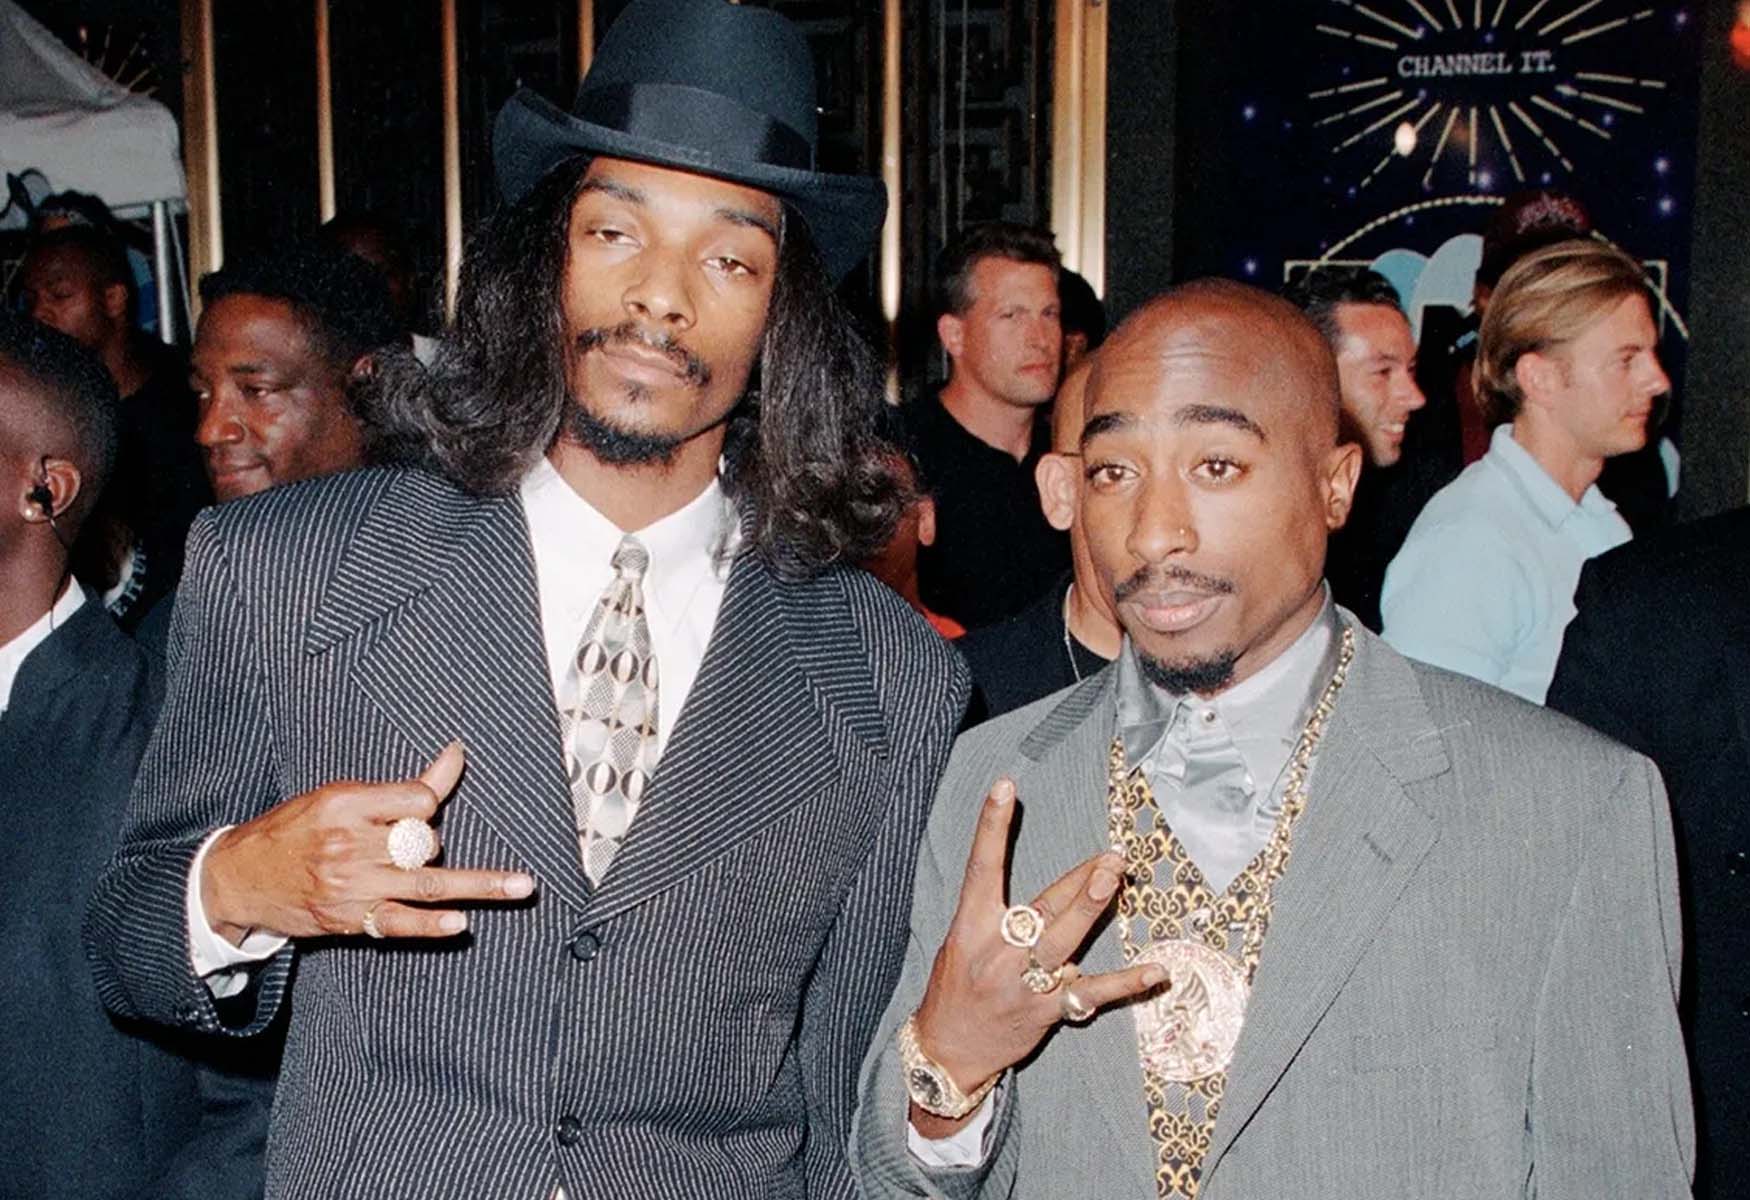 Snoop Dogg And Tupac’s Death Row Pendants Set To Fetch $1 Million At Auction